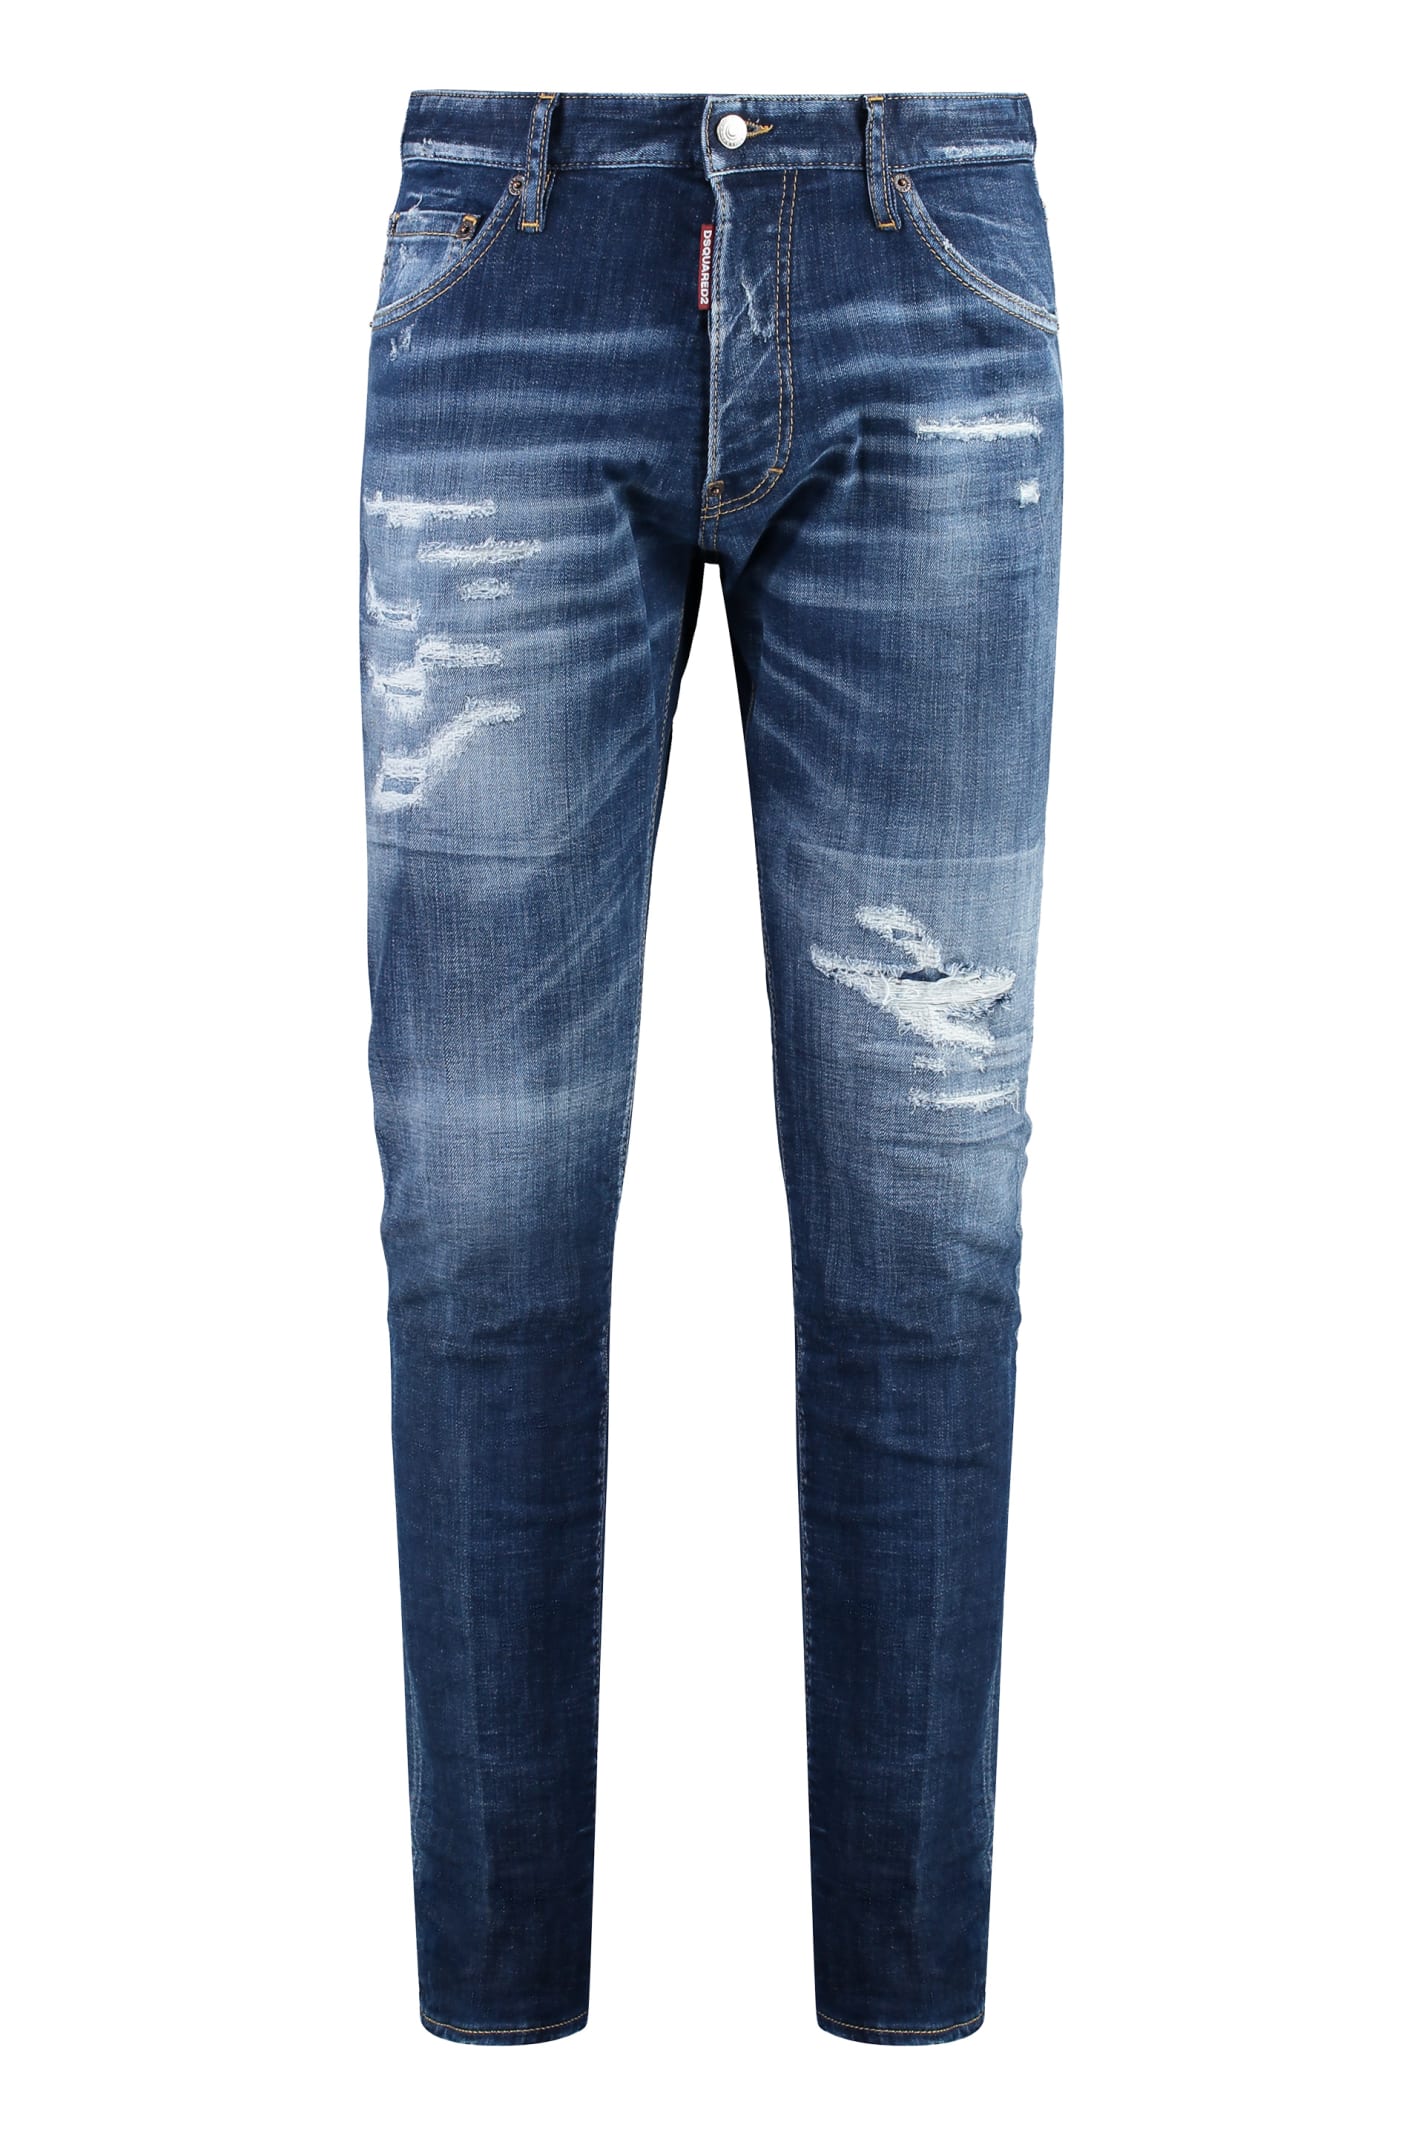 DSQUARED2 COOL-GUY JEANS